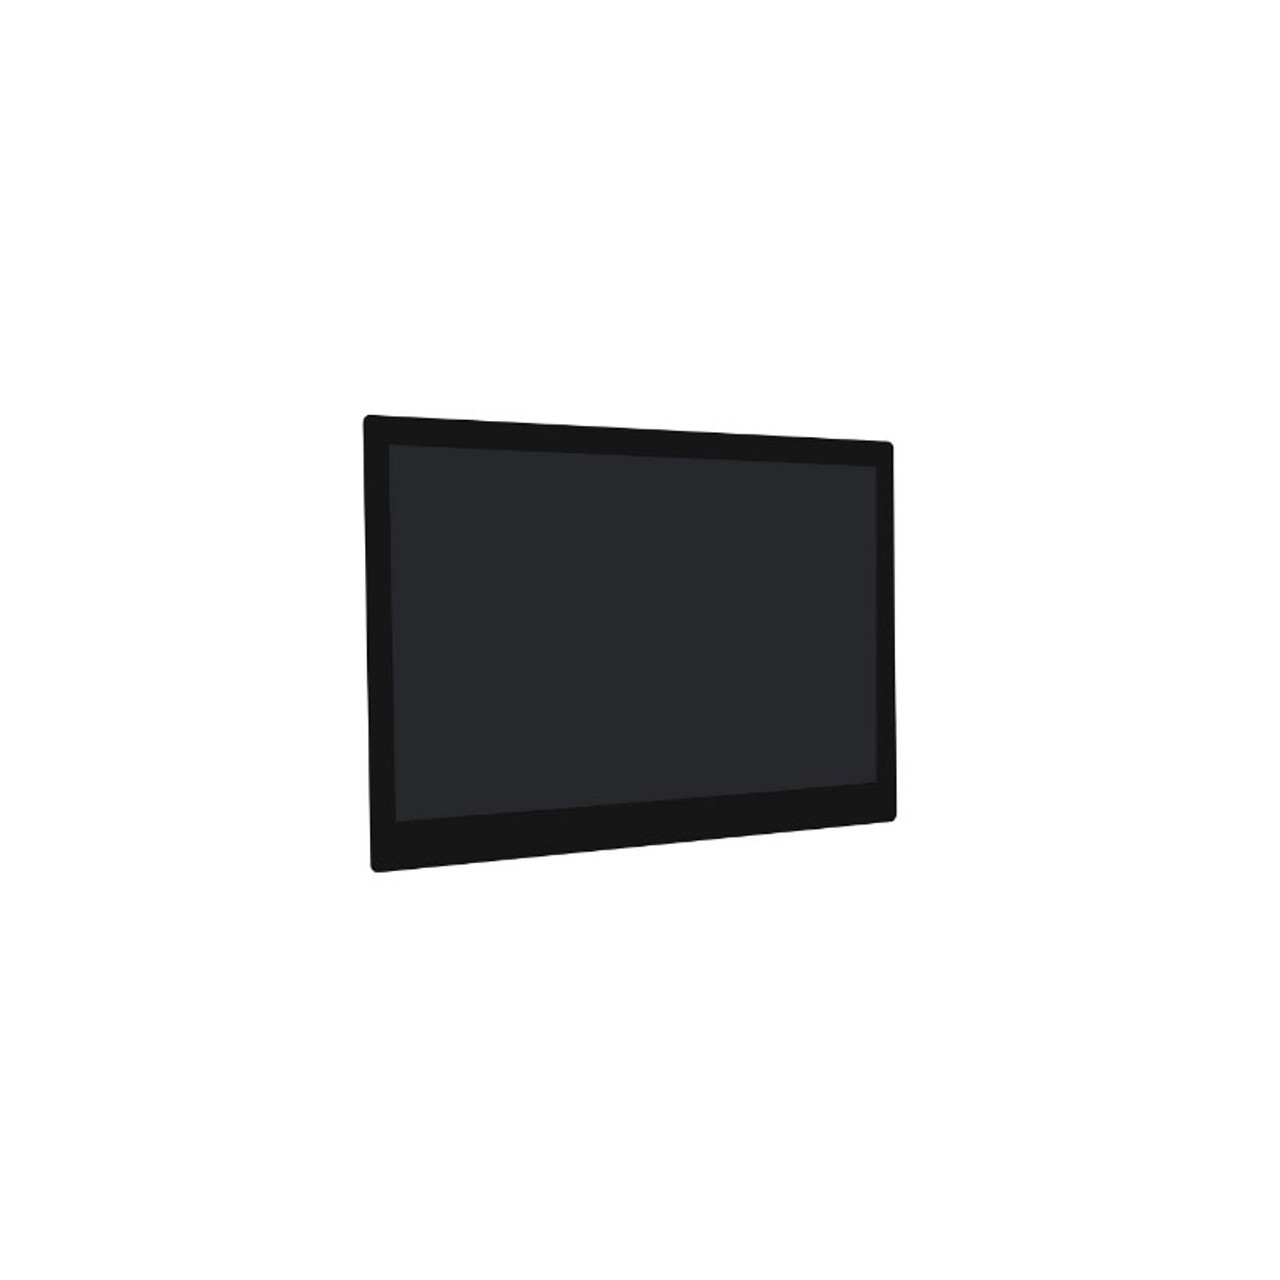 10.1inch QLED Quantum Dot Display, Capacitive Touch, 1280x720, G+G ...